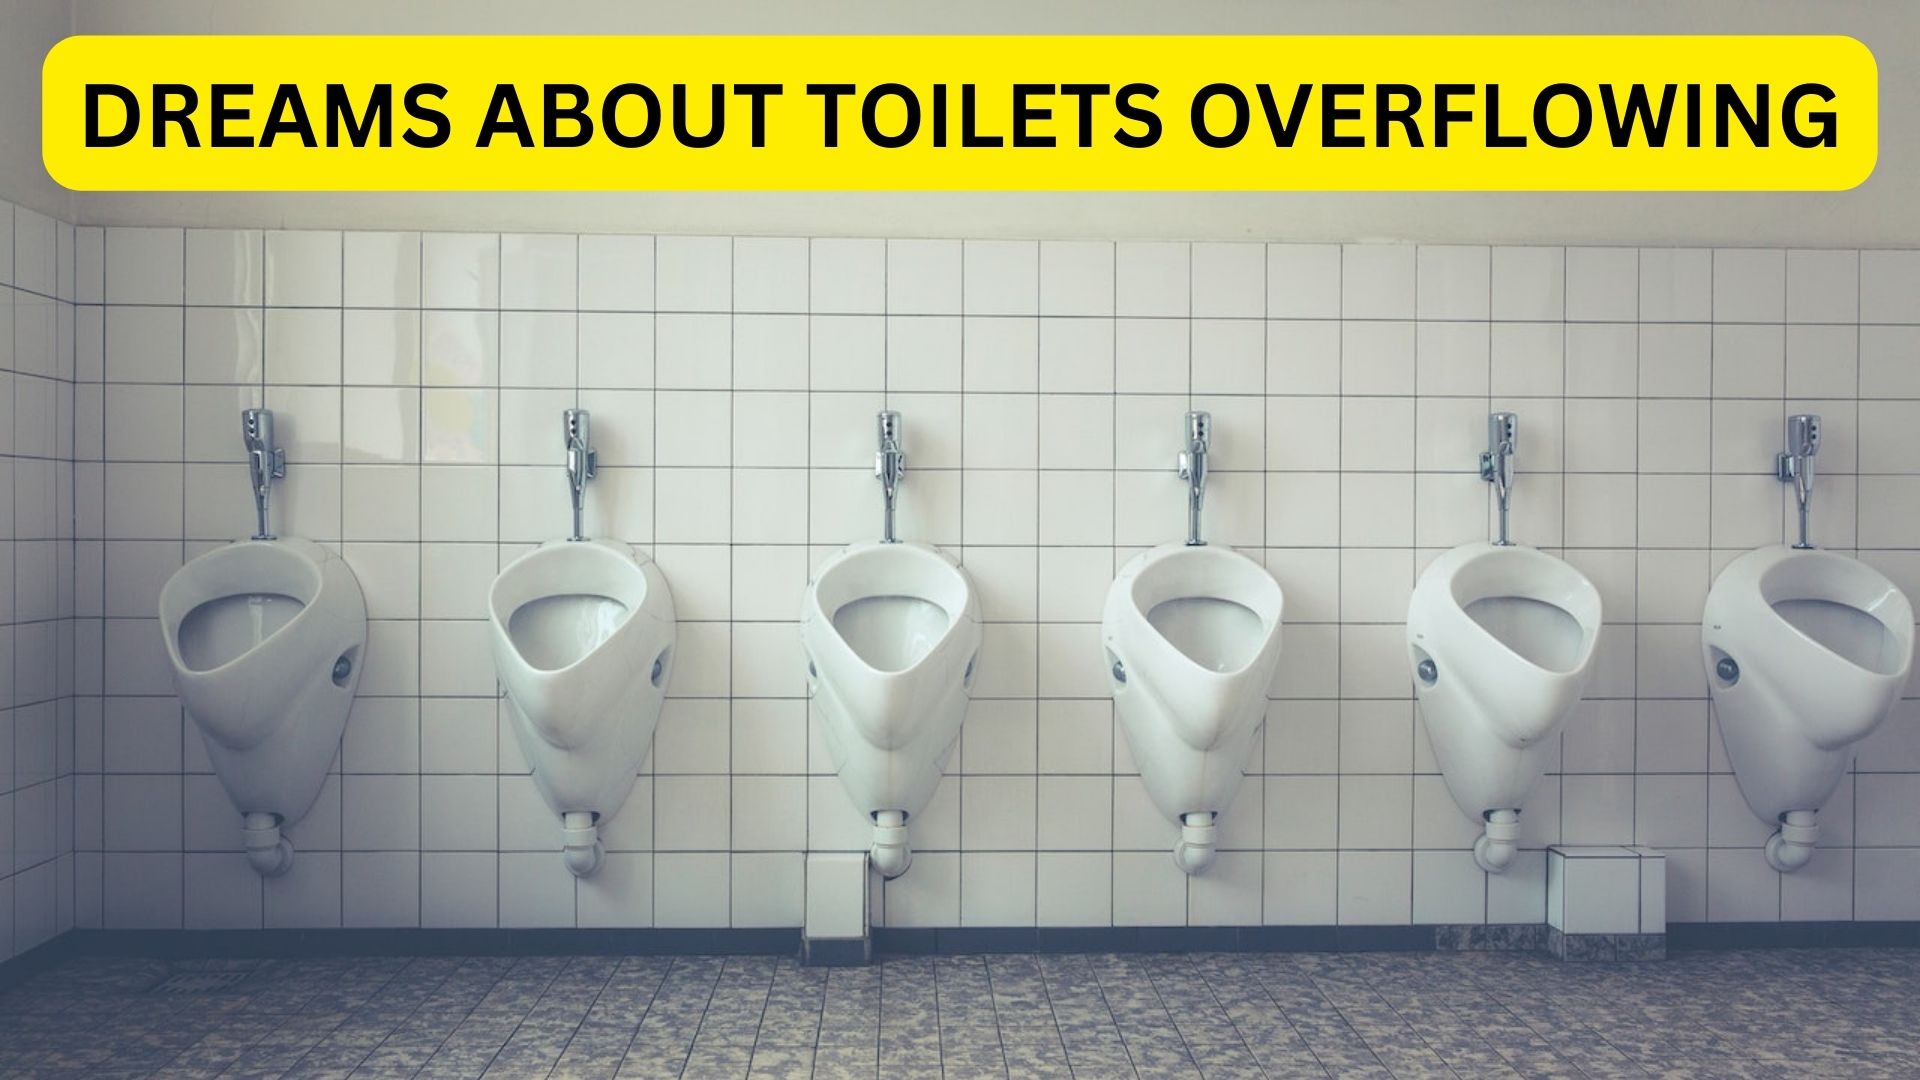 Dreams About Toilets Overflowing - A Sign Of Declining Metabolic Function